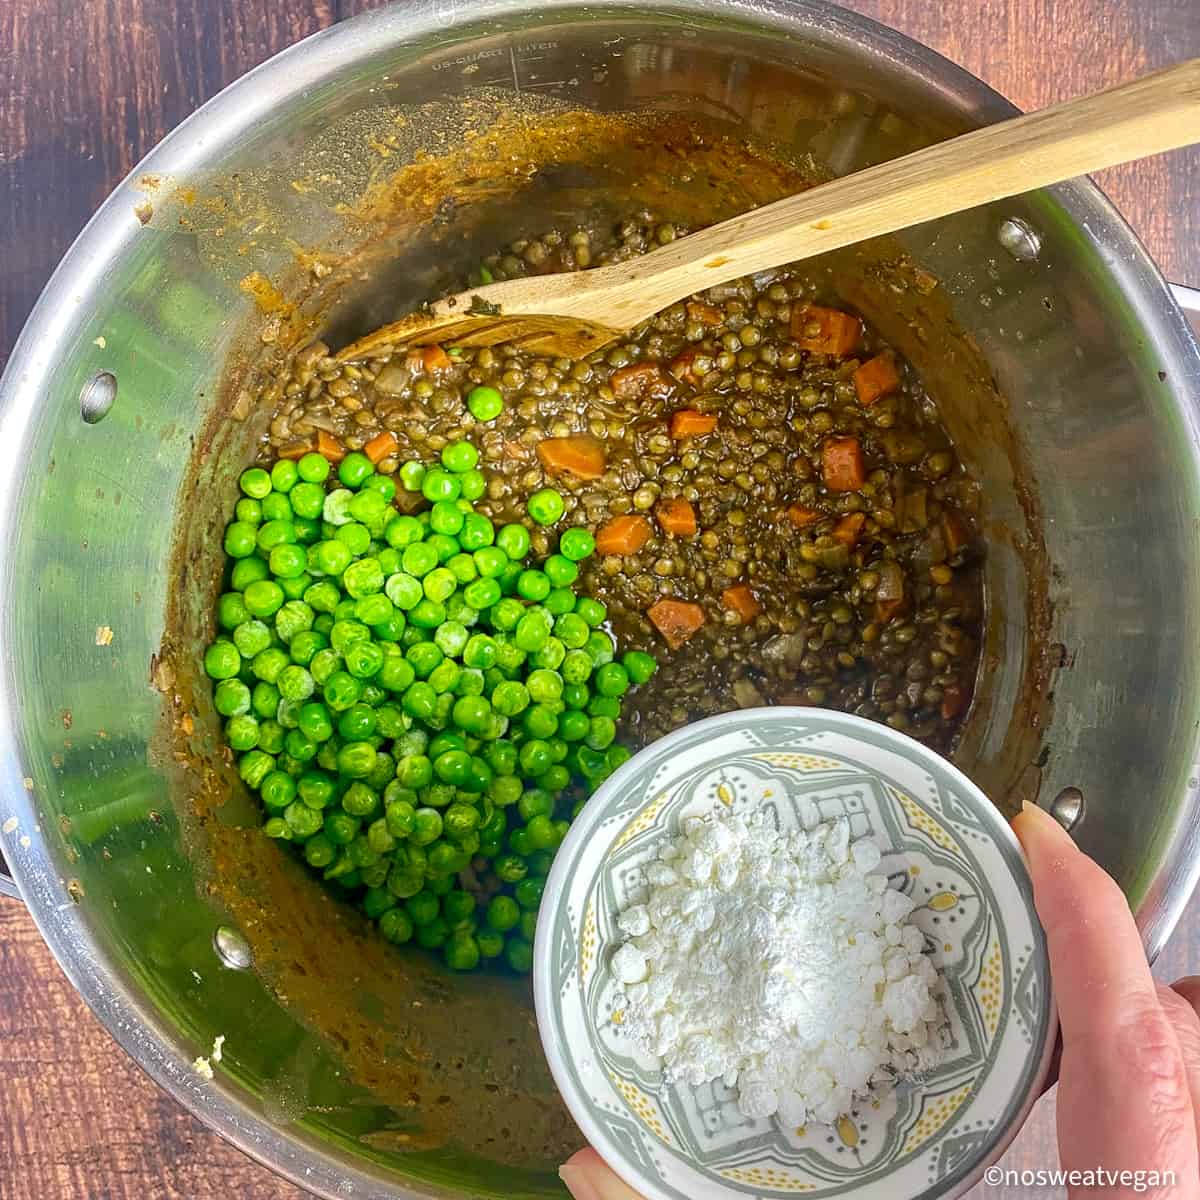 Frozen peas and cornstarch added to the lentil mixture.